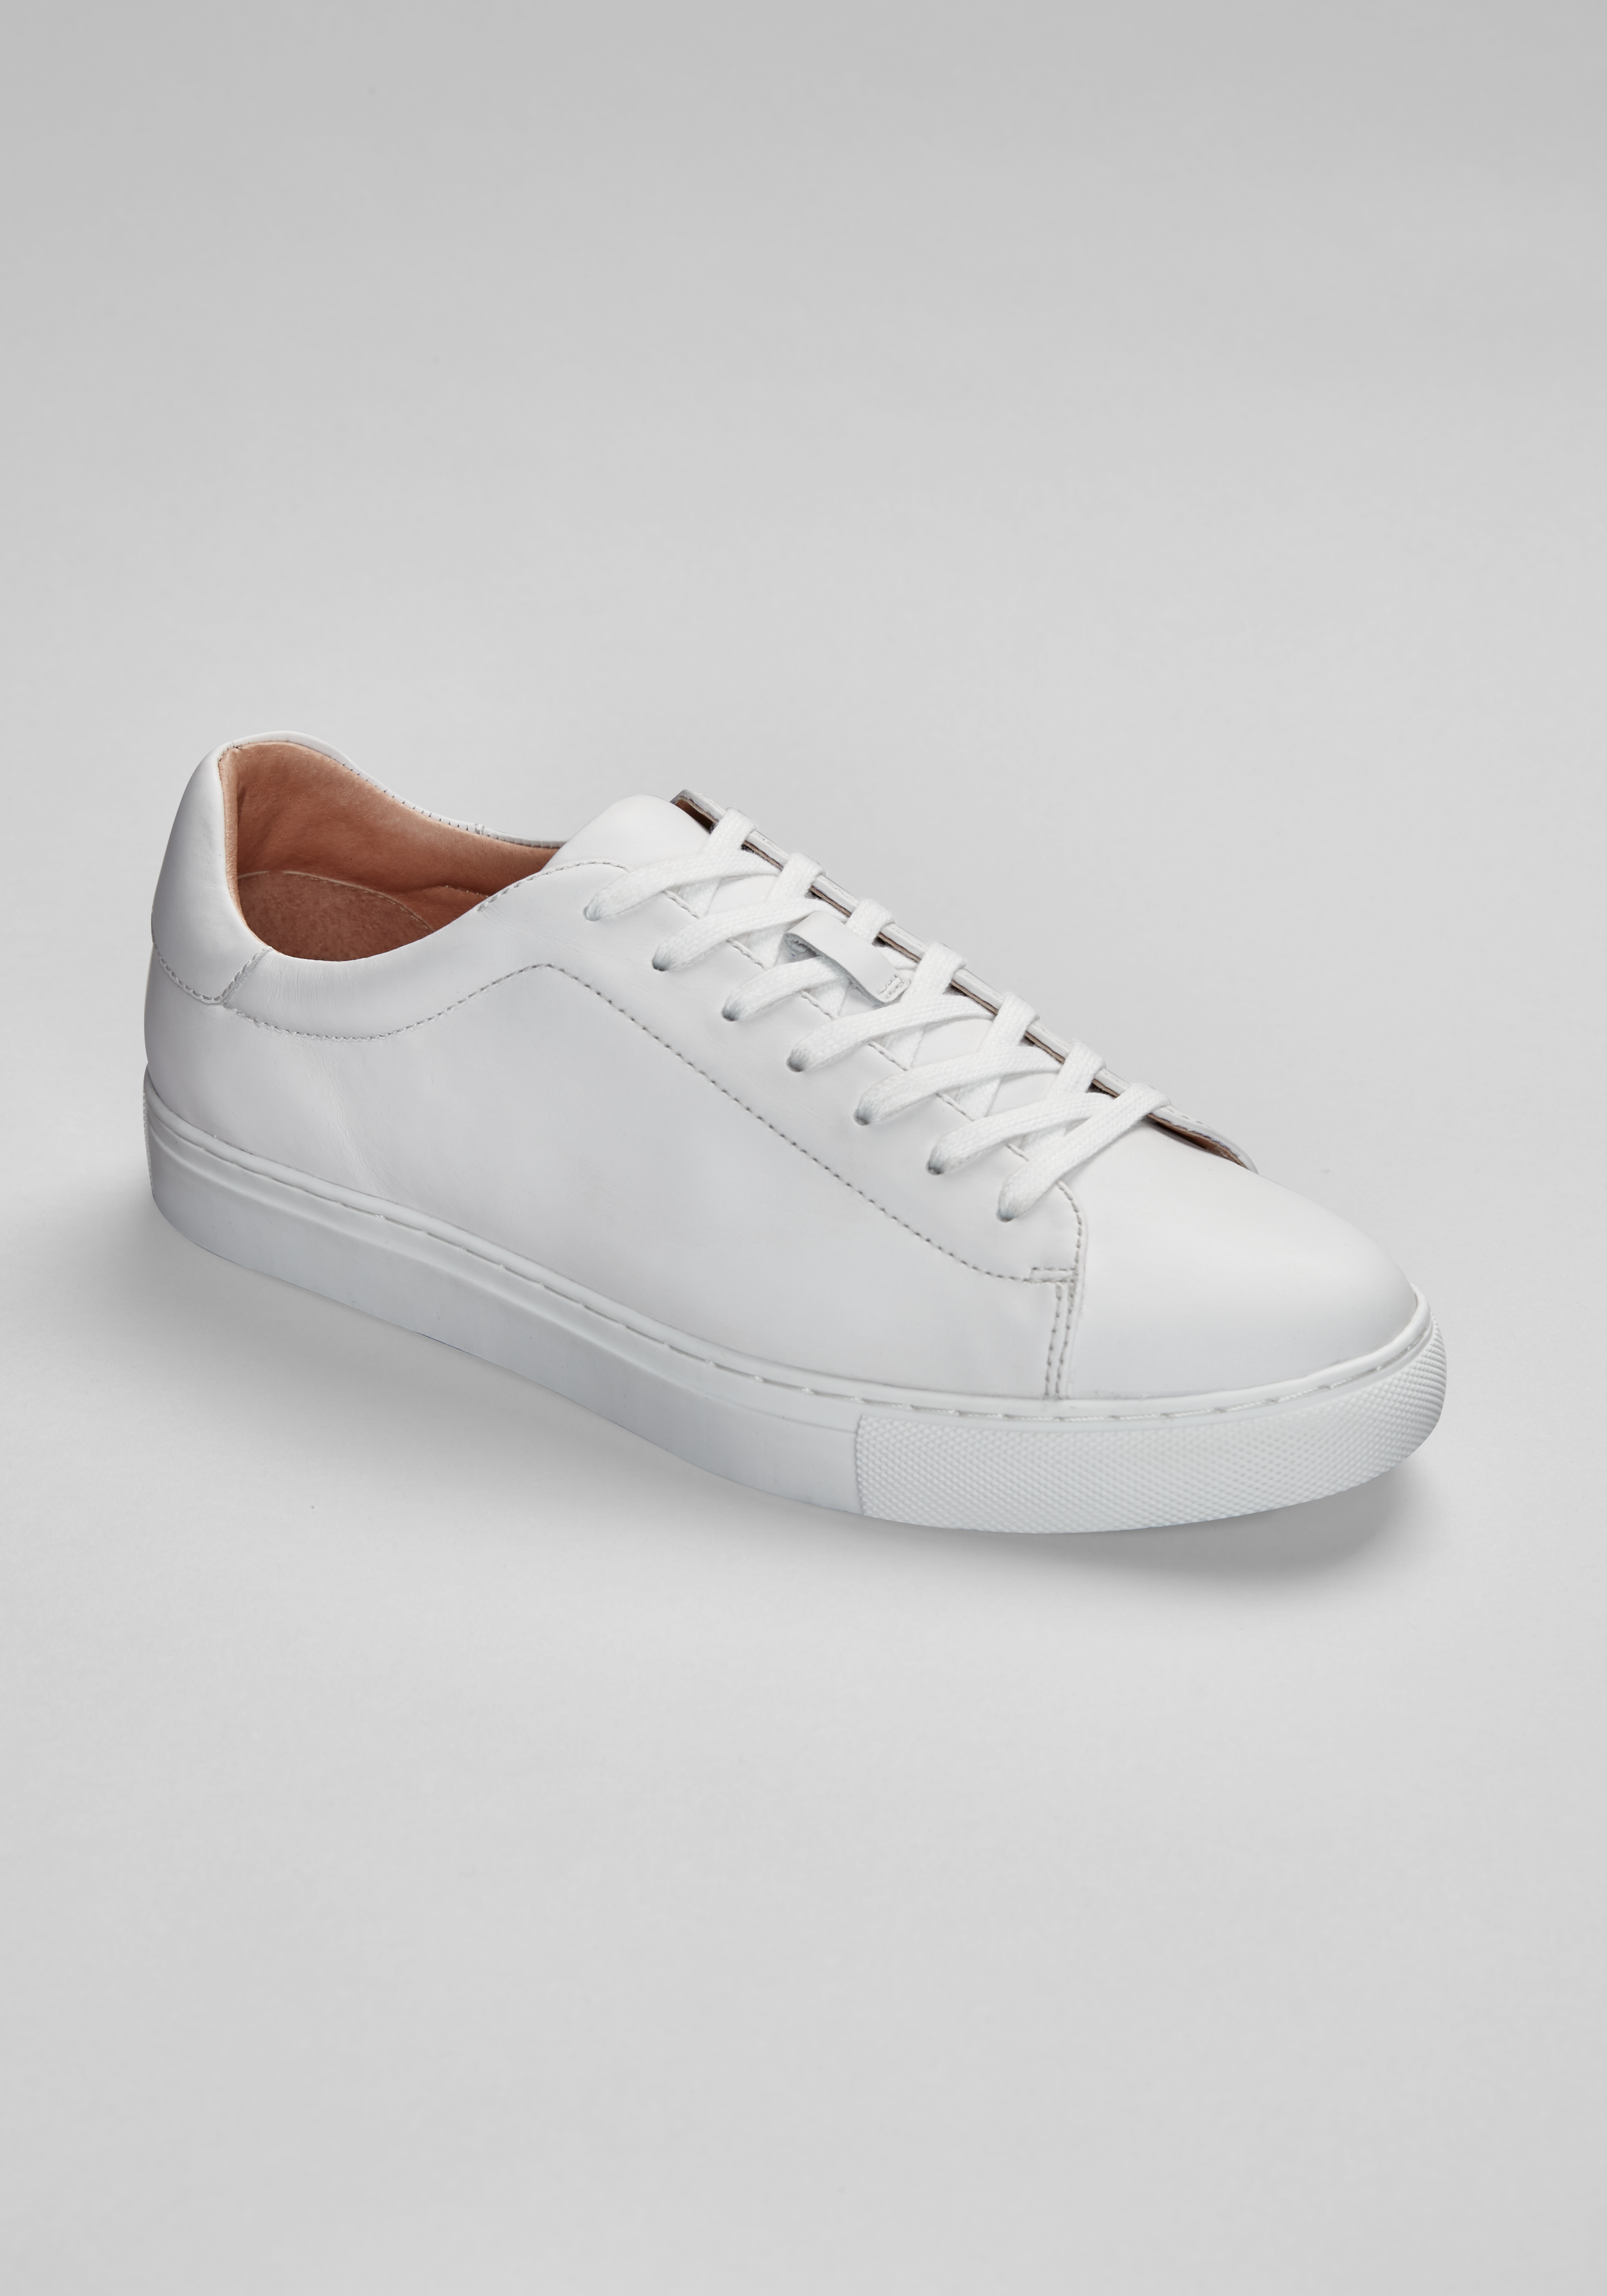 Joseph Abboud Adriano Sneakers CLEARANCE